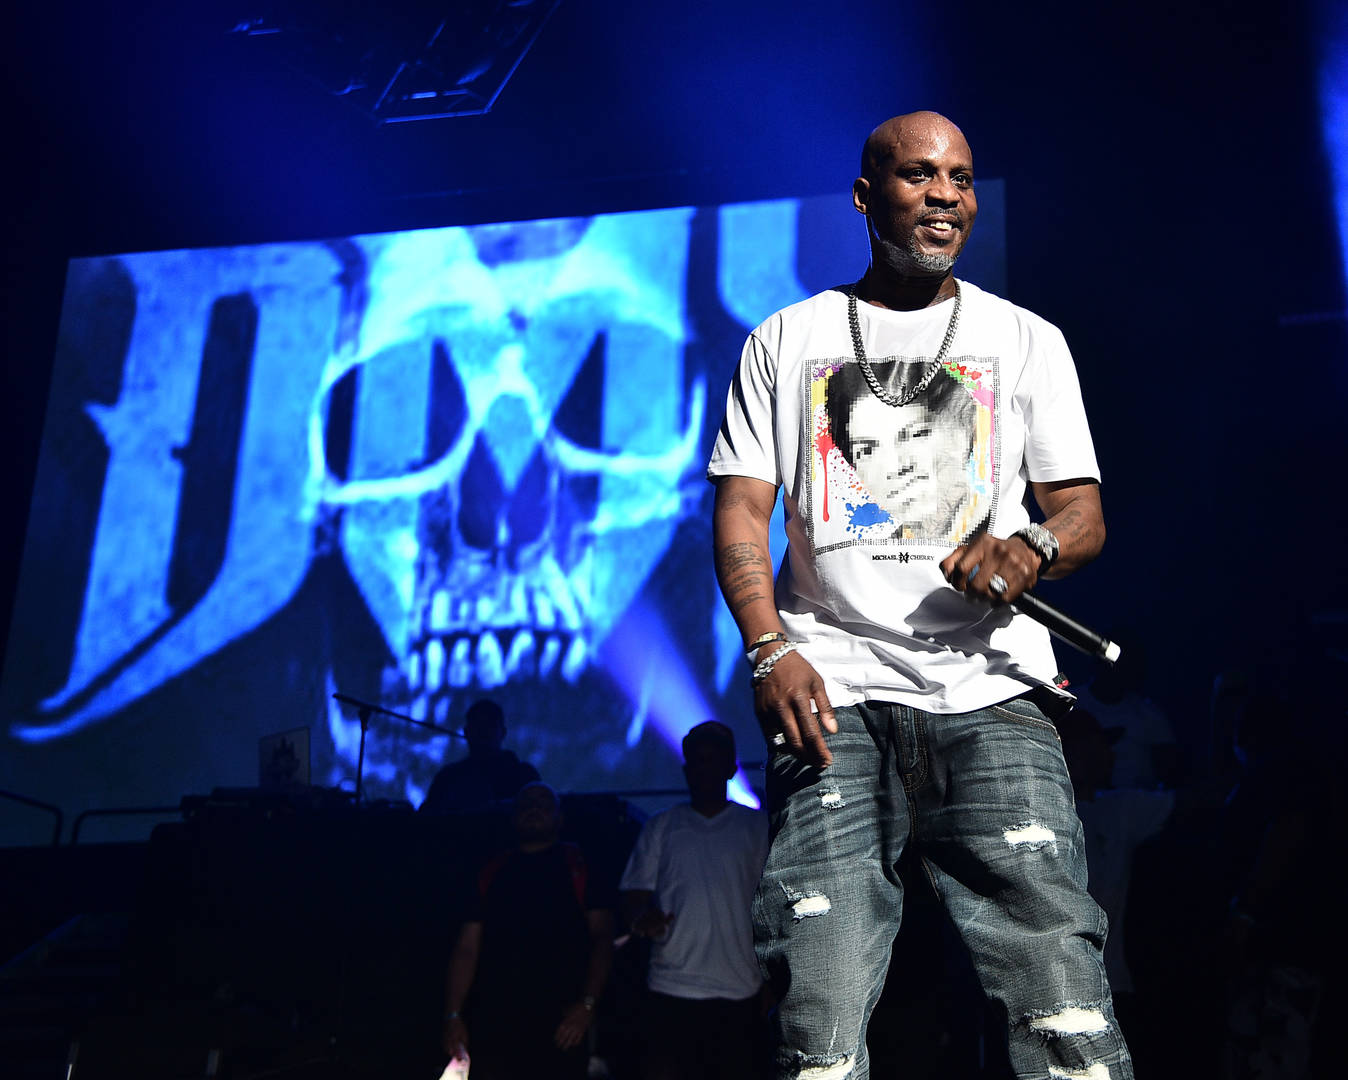 DMX Memorial Service Details Shared, Public Not Permitted To Attend 21